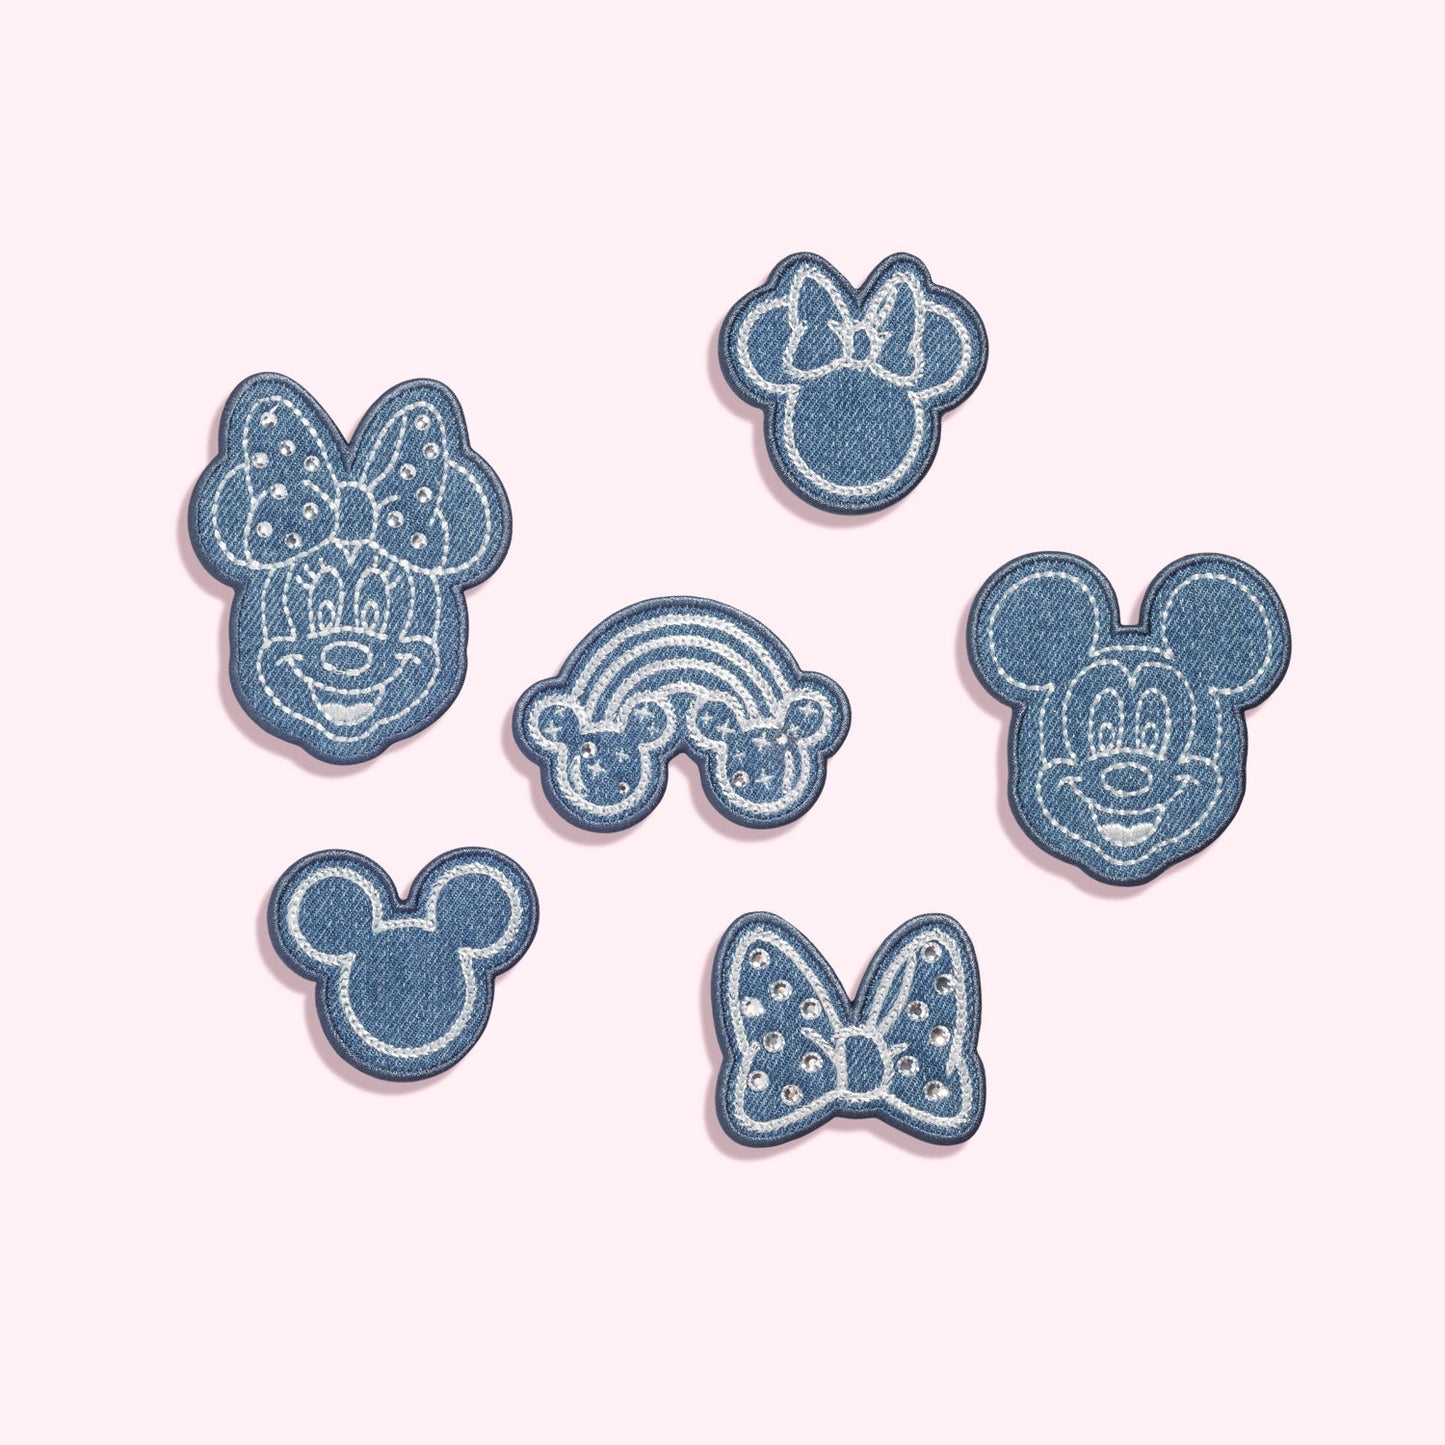 Denim Mickey Mouse Silhouette Patch